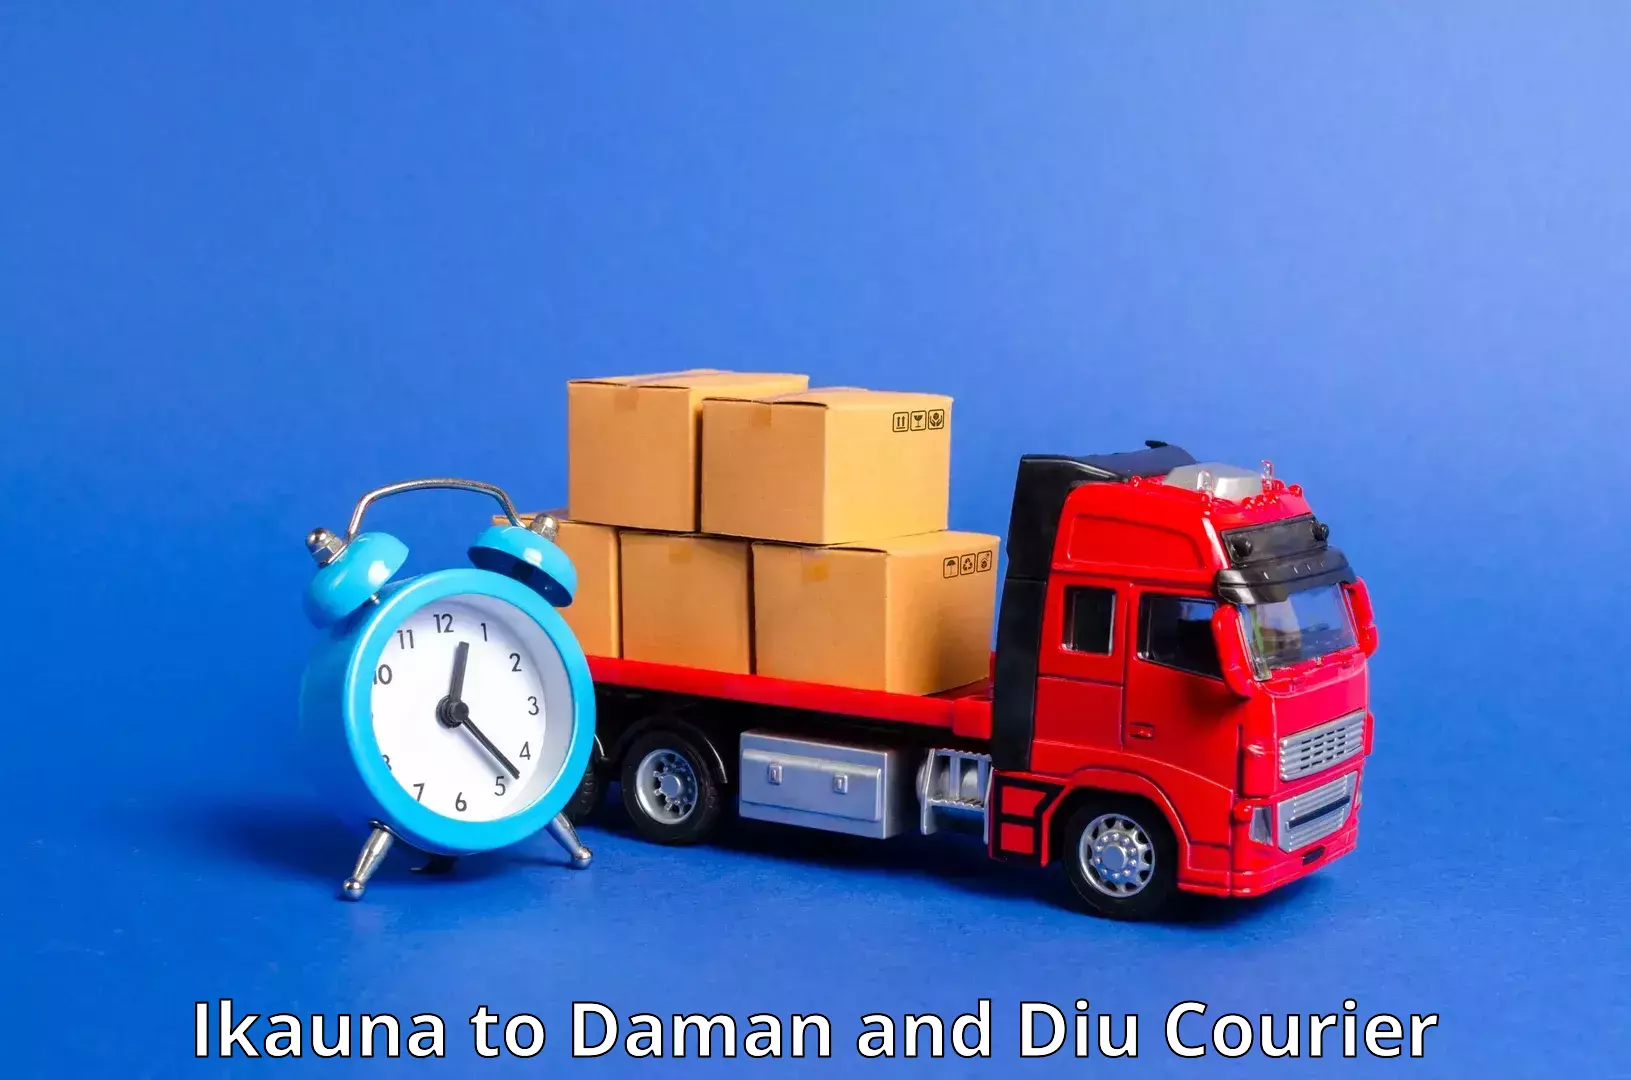 Express package services Ikauna to Daman